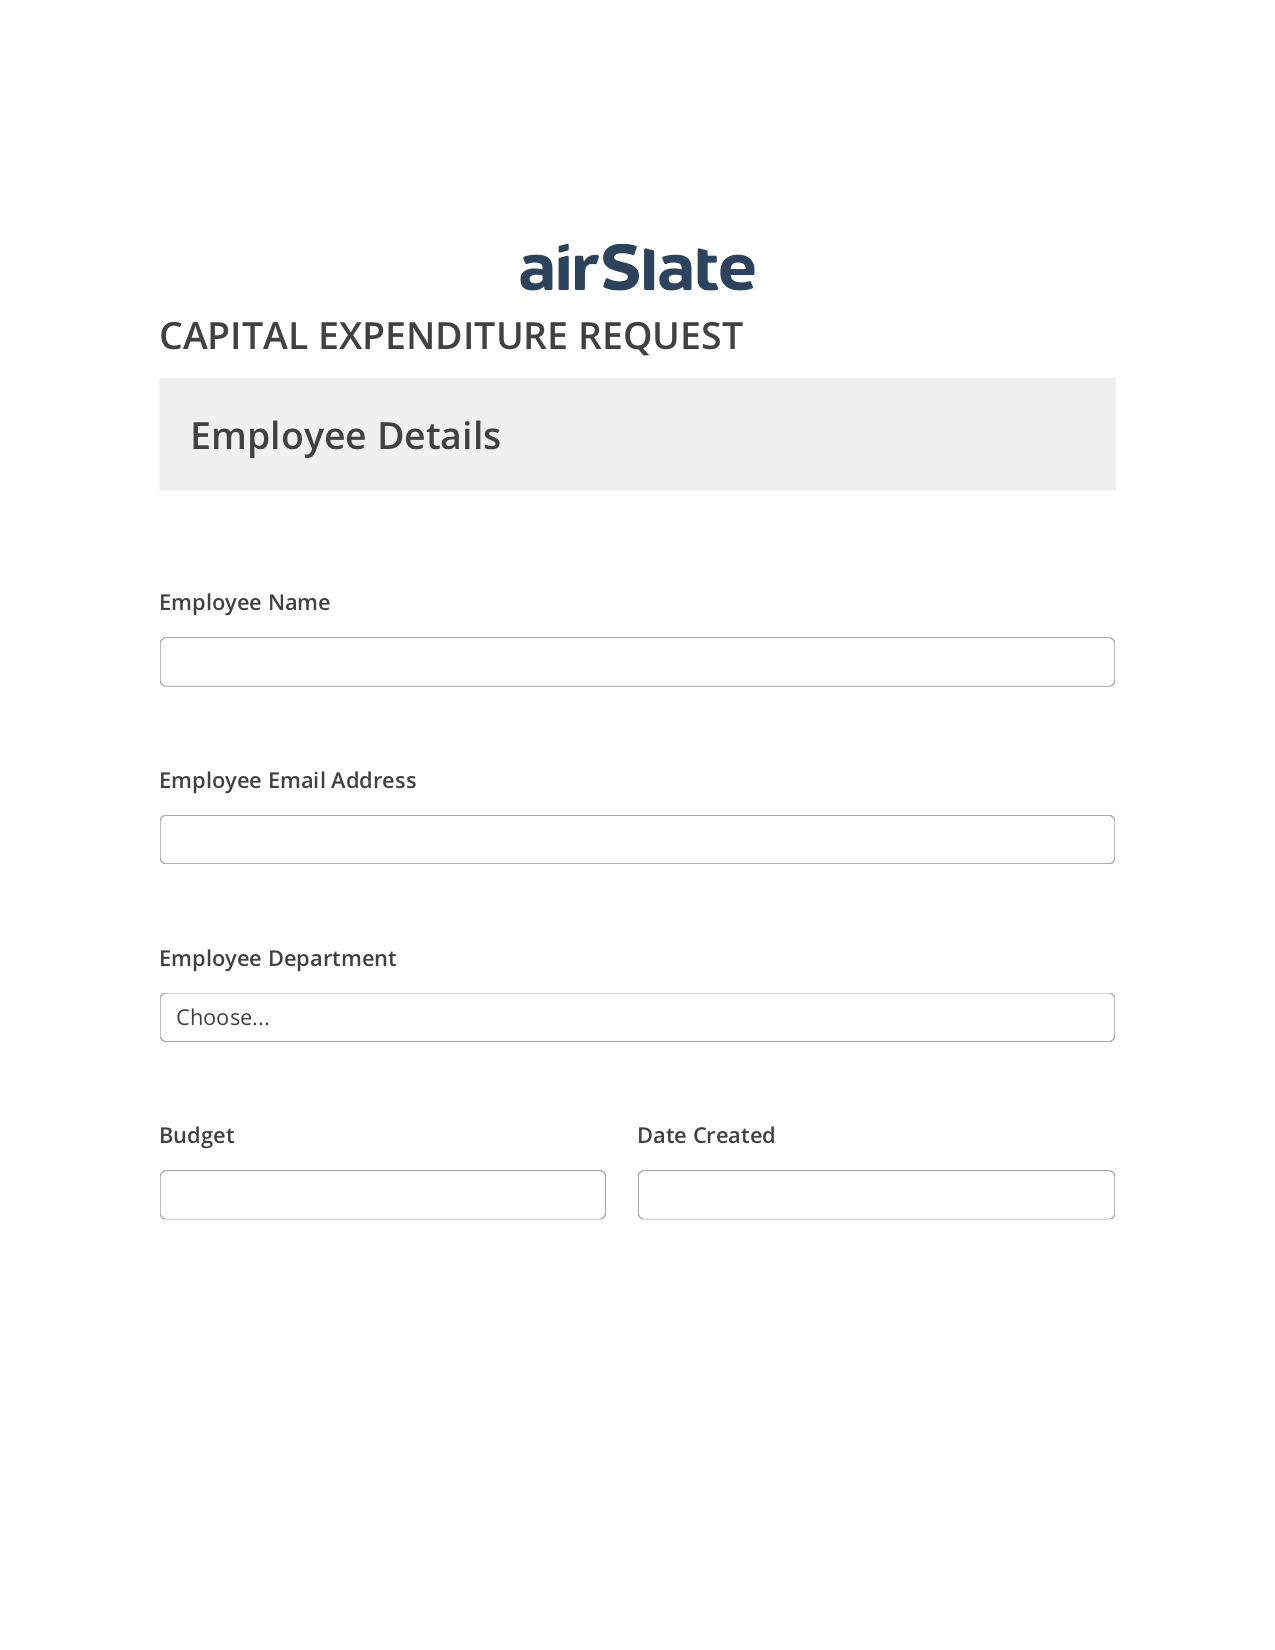 Multirole Capital Expenditure Request Approval Workflow Pre-fill from Google Sheet Dropdown Options Bot, Create Slate Reminder Bot, Archive to OneDrive Bot